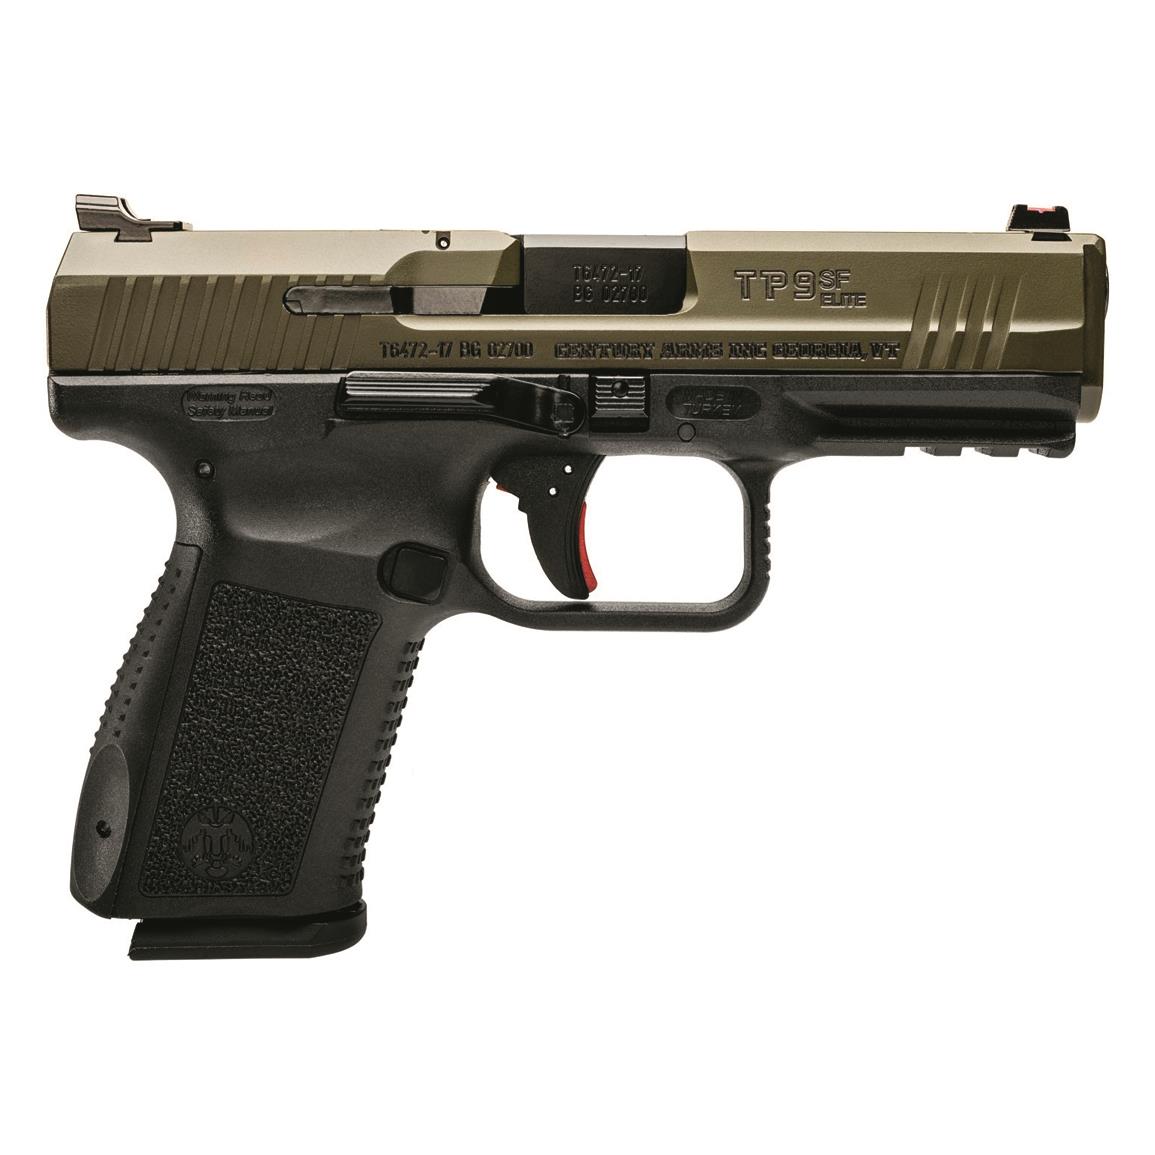 Canik TP9SF Elite-S, Semi-Automatic, 9mm, 4.19" Barrel, ODG Frame, 15+1 Rounds